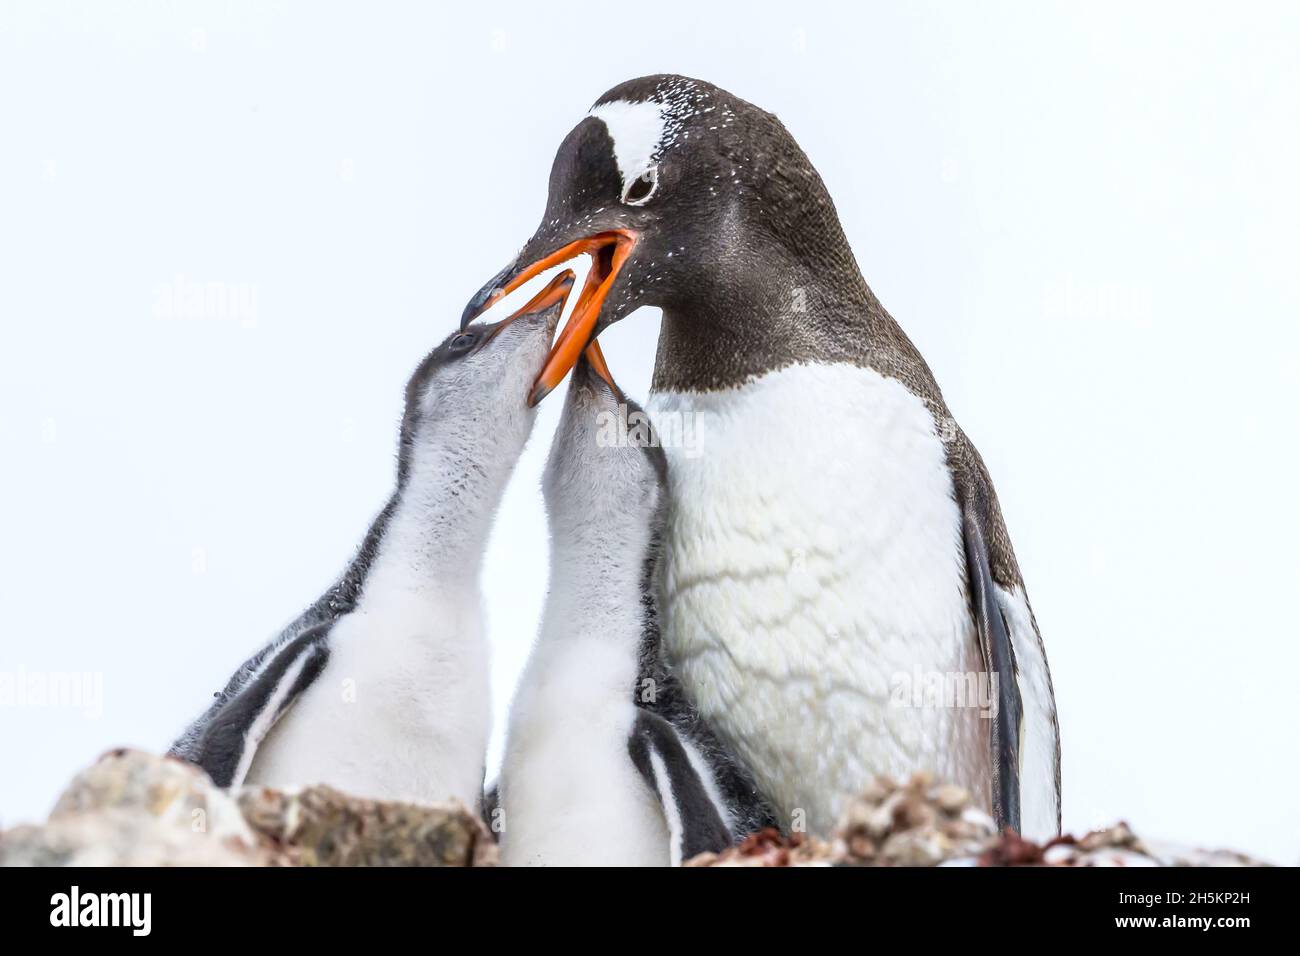 Two Gentoo Penguin chicks with their mother at feeding time in Port Lockroy at British Base A in Antarctica. Stock Photo